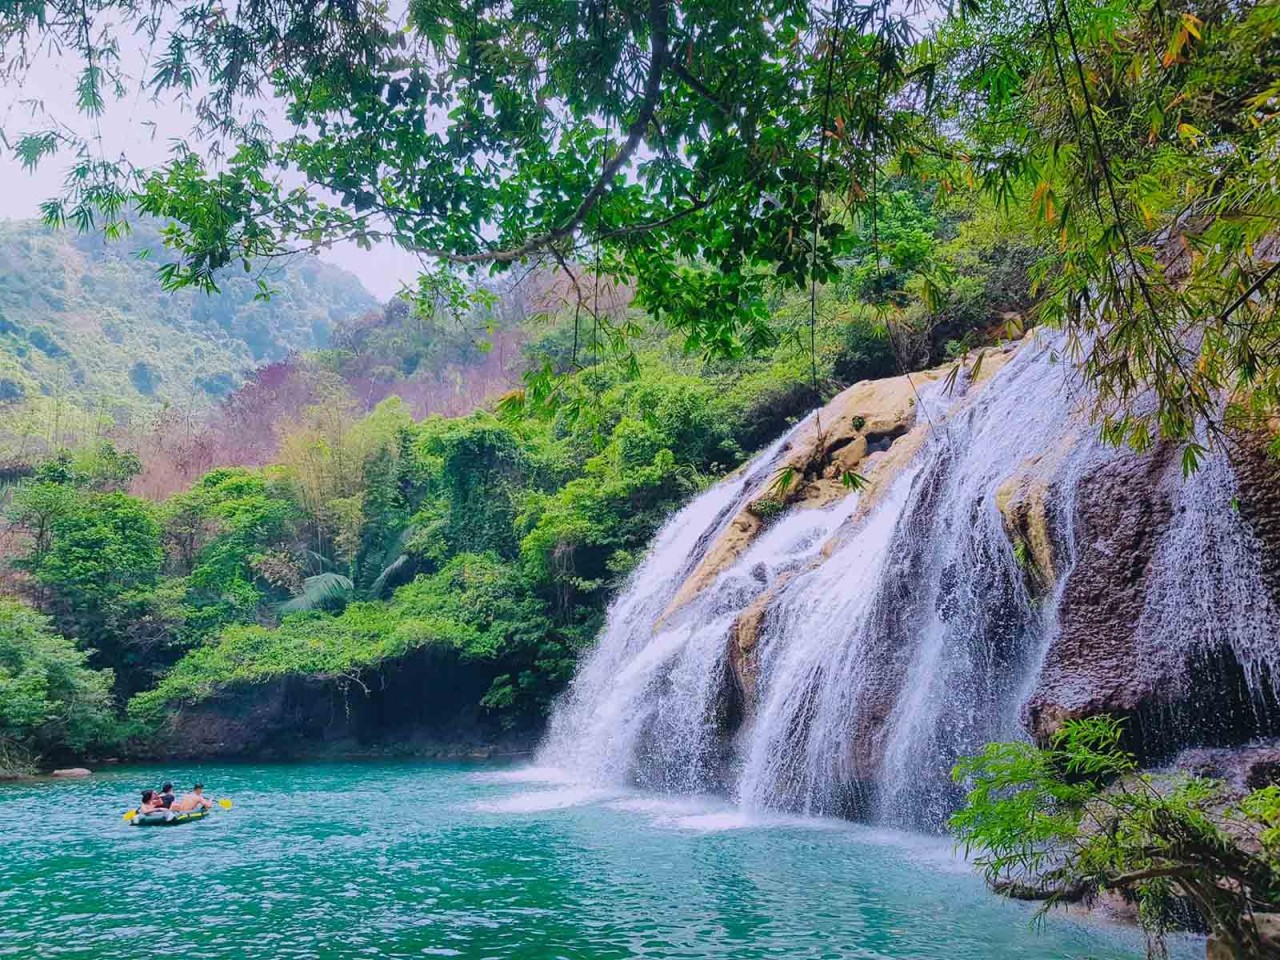 Ta Puong Waterfall 2 offers a lake area of 5,000 square meters, inviting visitors to enjoy swimming and diving to beat the summer heat. (Photo: TITC)